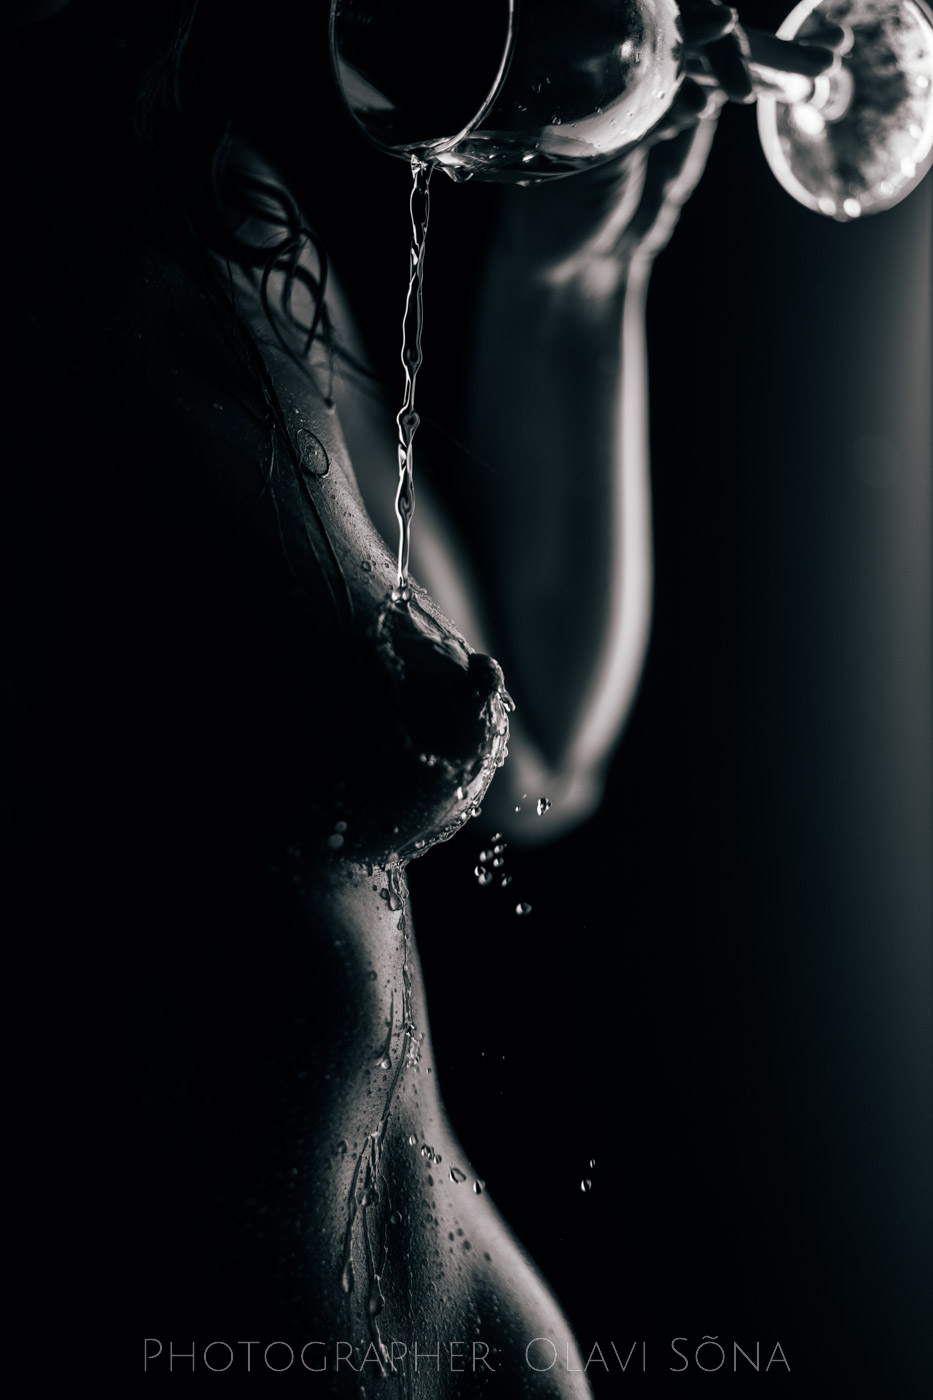 Pouring water on a boob. Nude art.